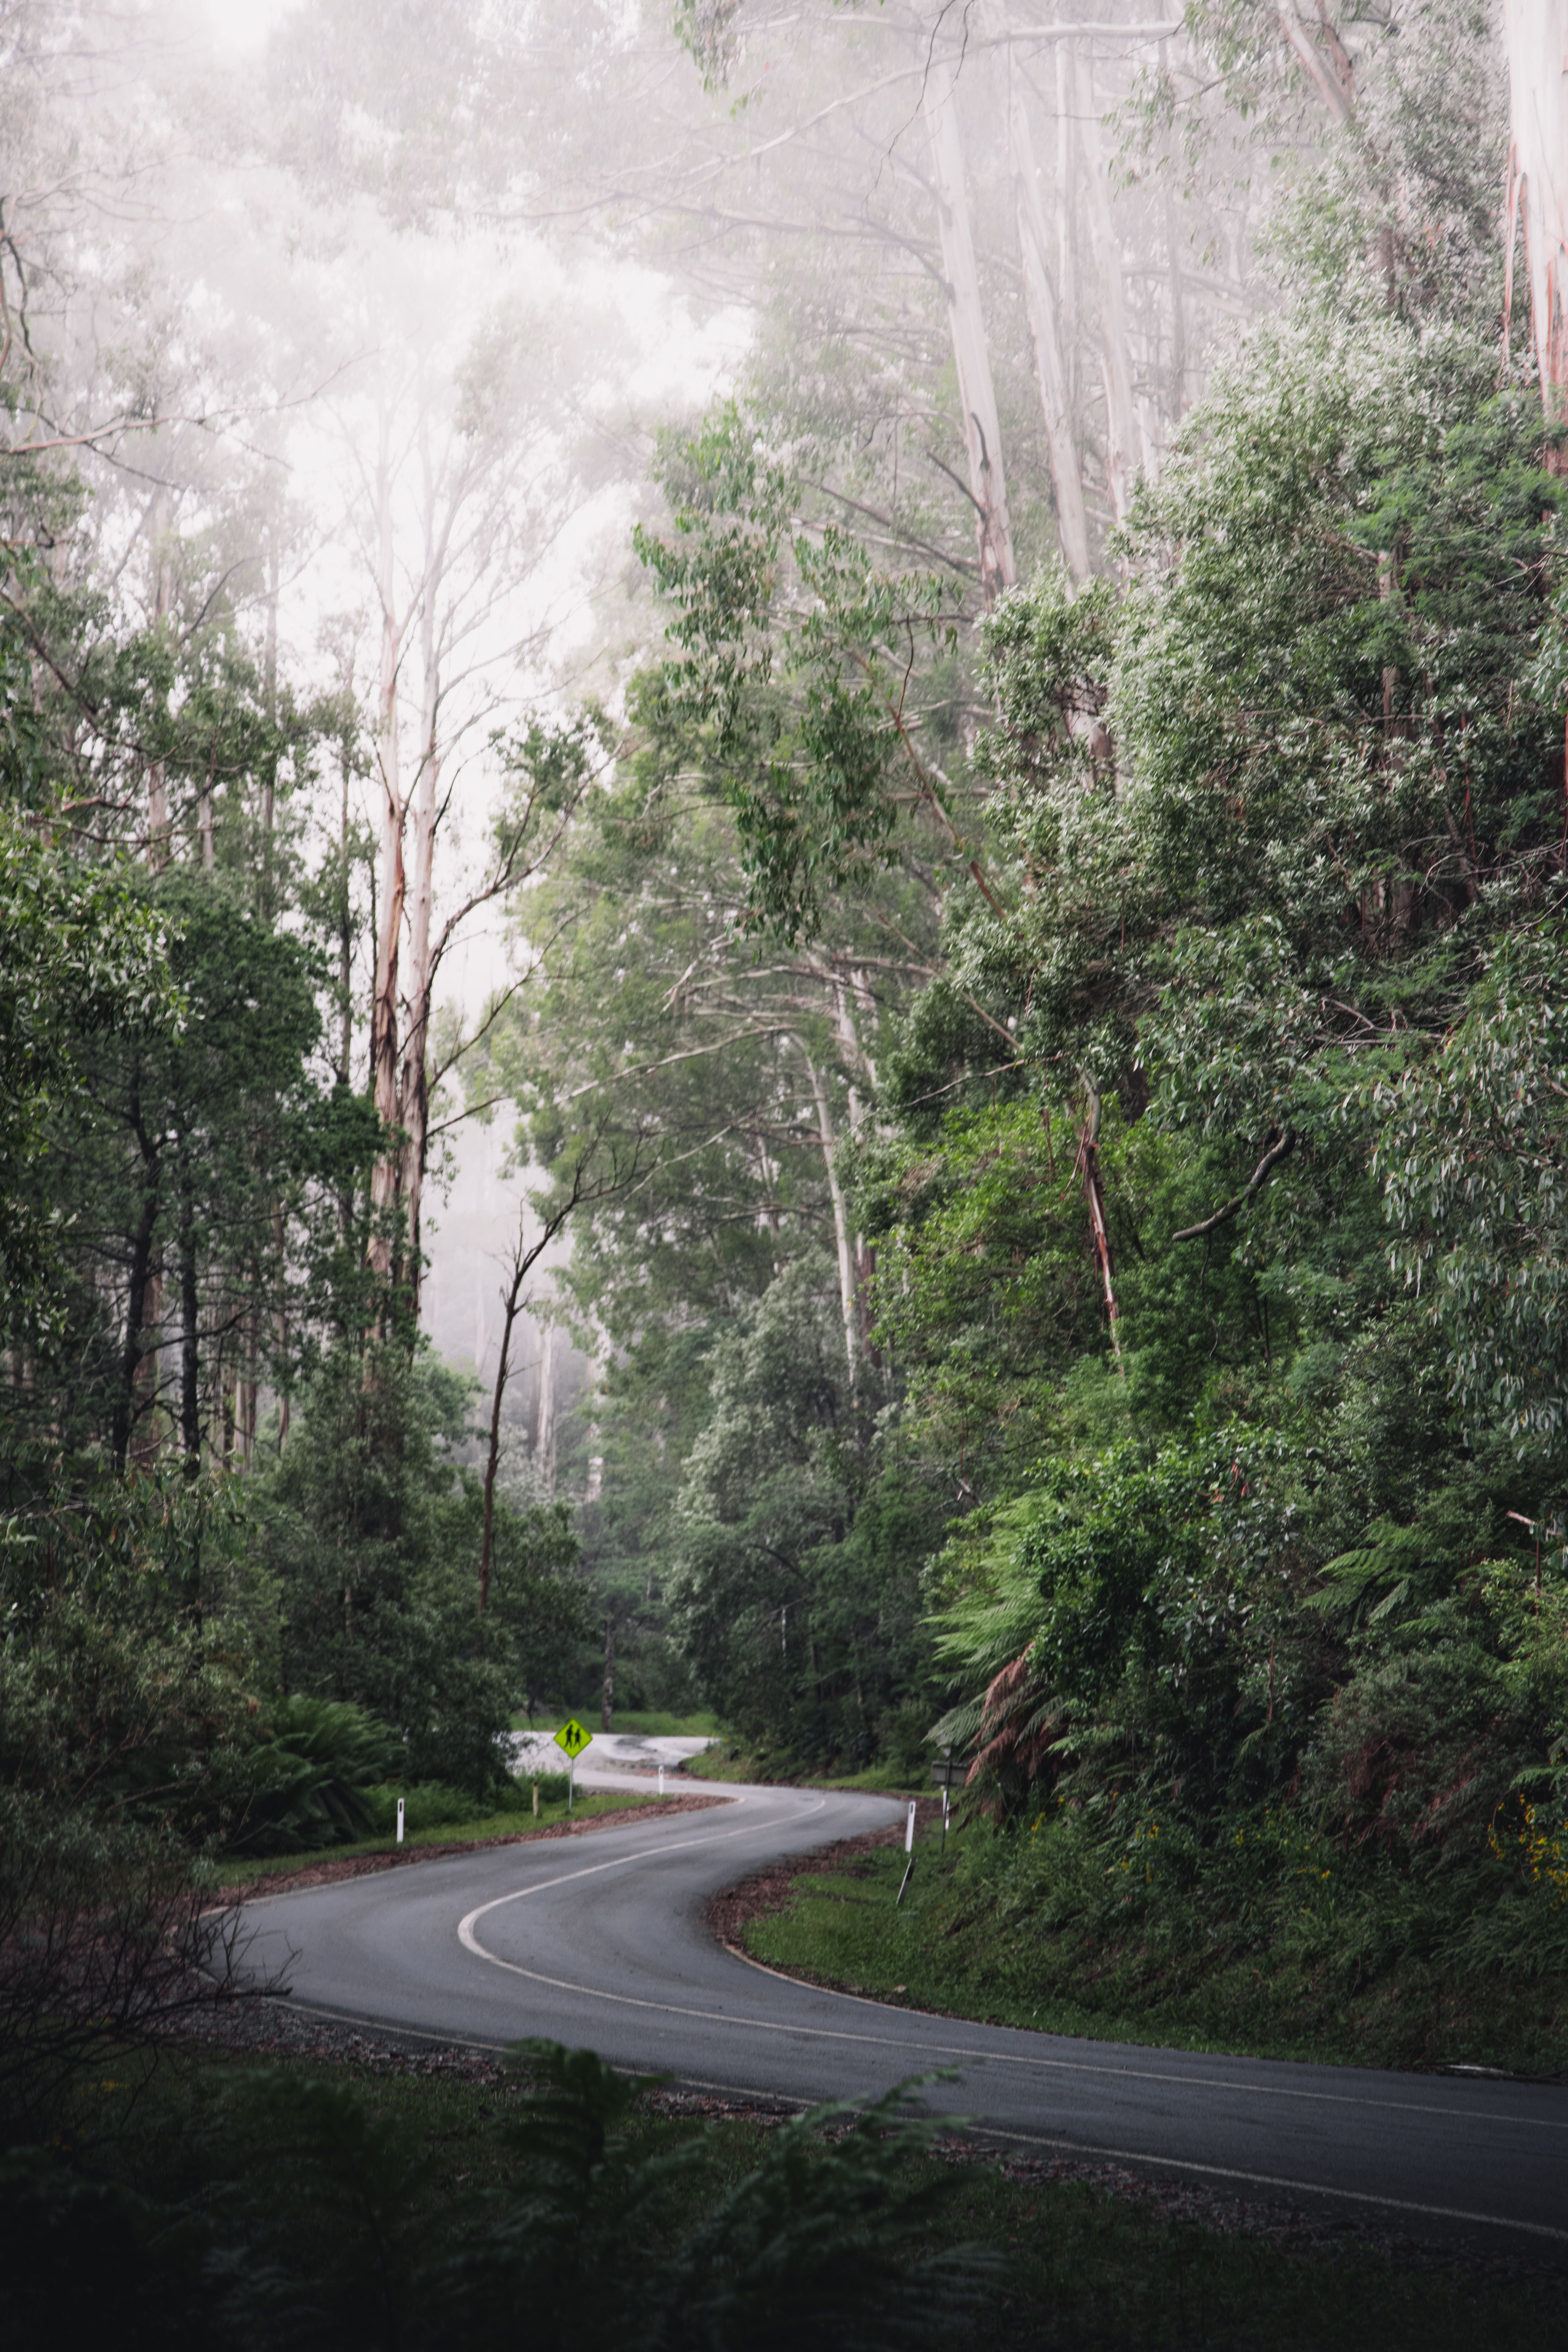 A road going through the forests in Mount Donna Buang, Warburton, Victoria, Australia